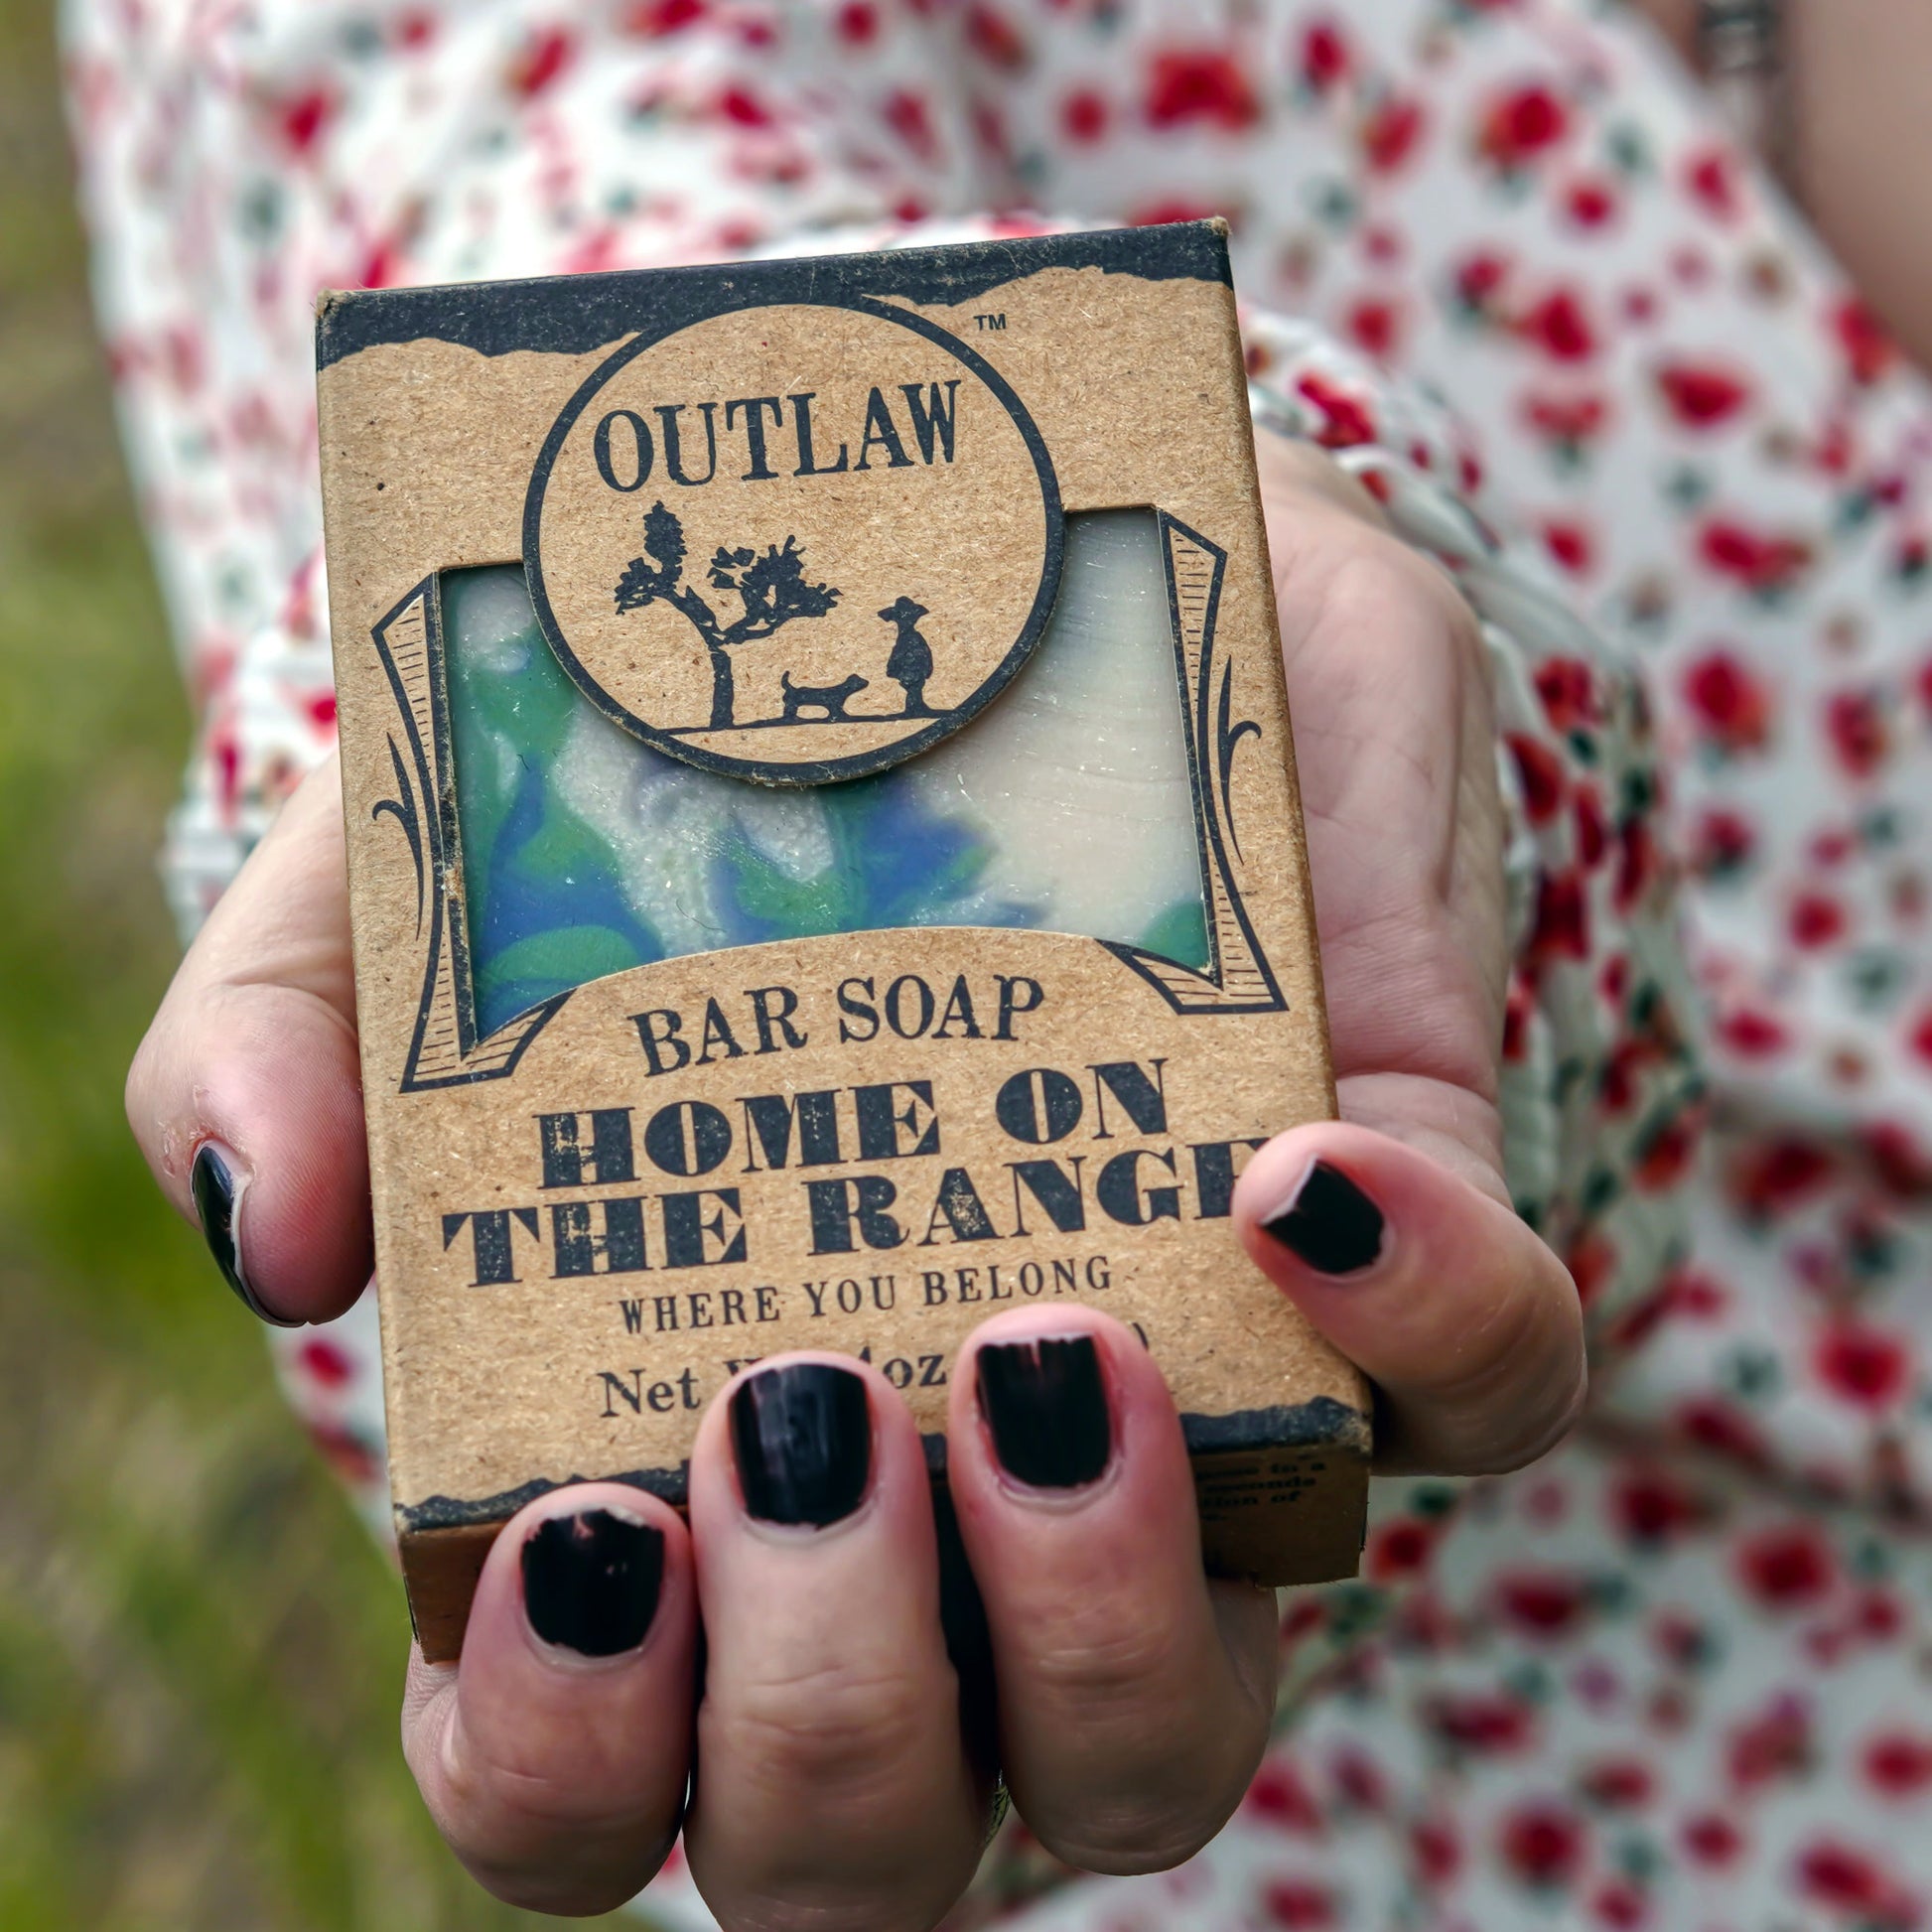 https://liveoutlaw.com/cdn/shop/products/Home-on-the-Range-HM-Barsoap-In-Hand.jpg?v=1652845224&width=1946